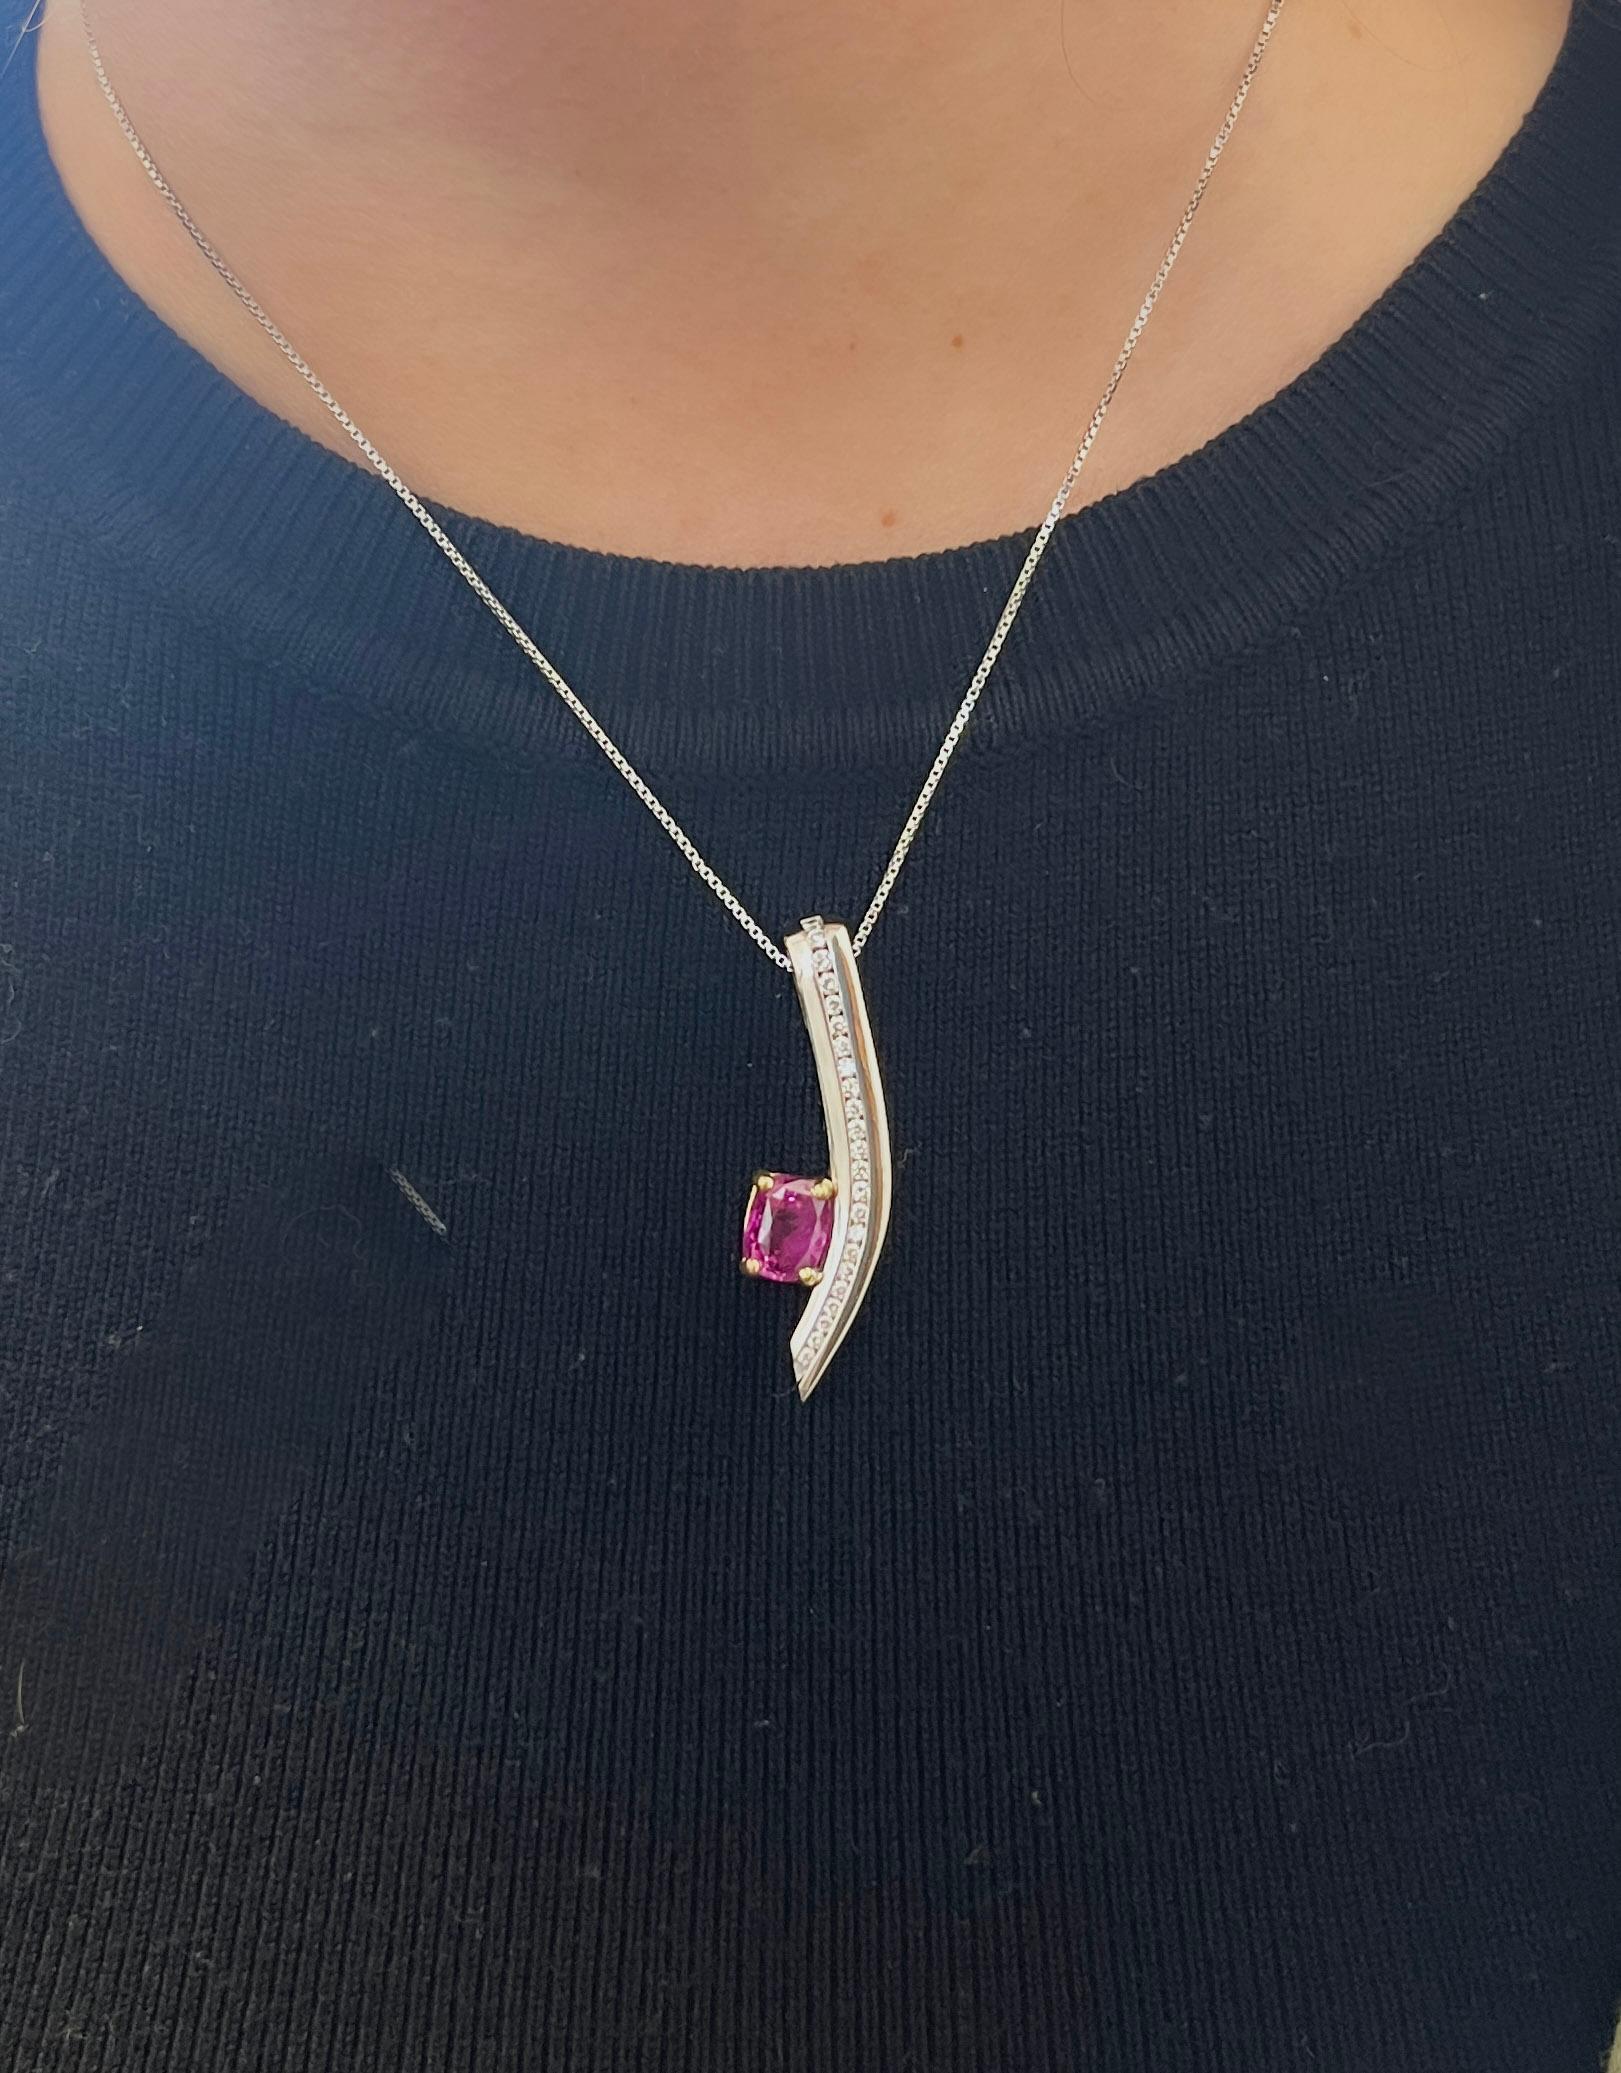  2.50 Carat GIA Certified Cushion-Cut Pink Sapphire and Diamond 18K Pendant In New Condition For Sale In Miami, FL